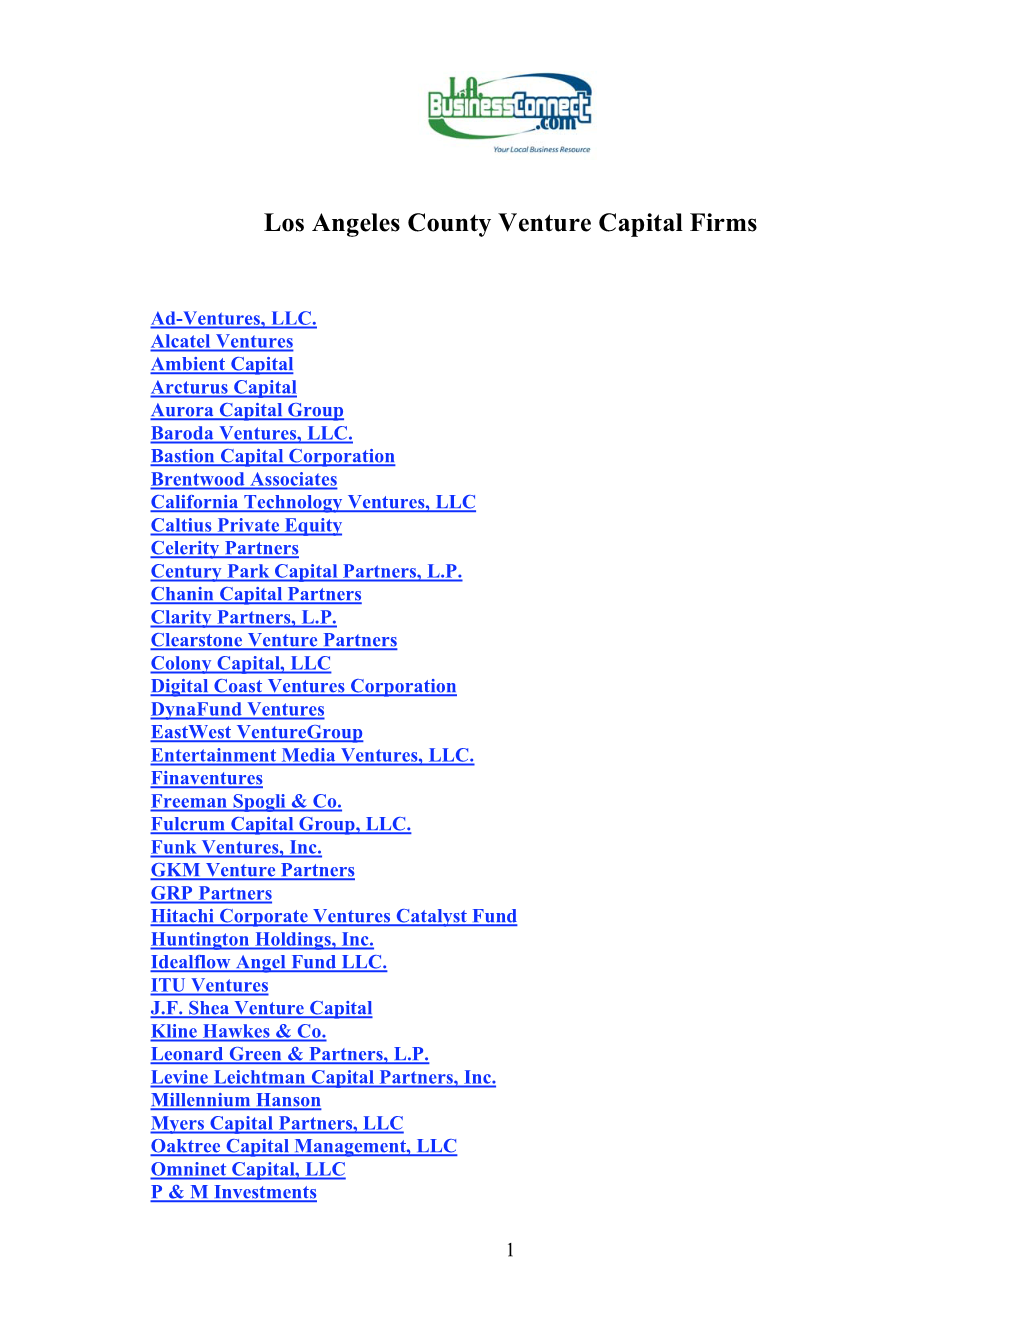 Los Angeles County Venture Capital Firms